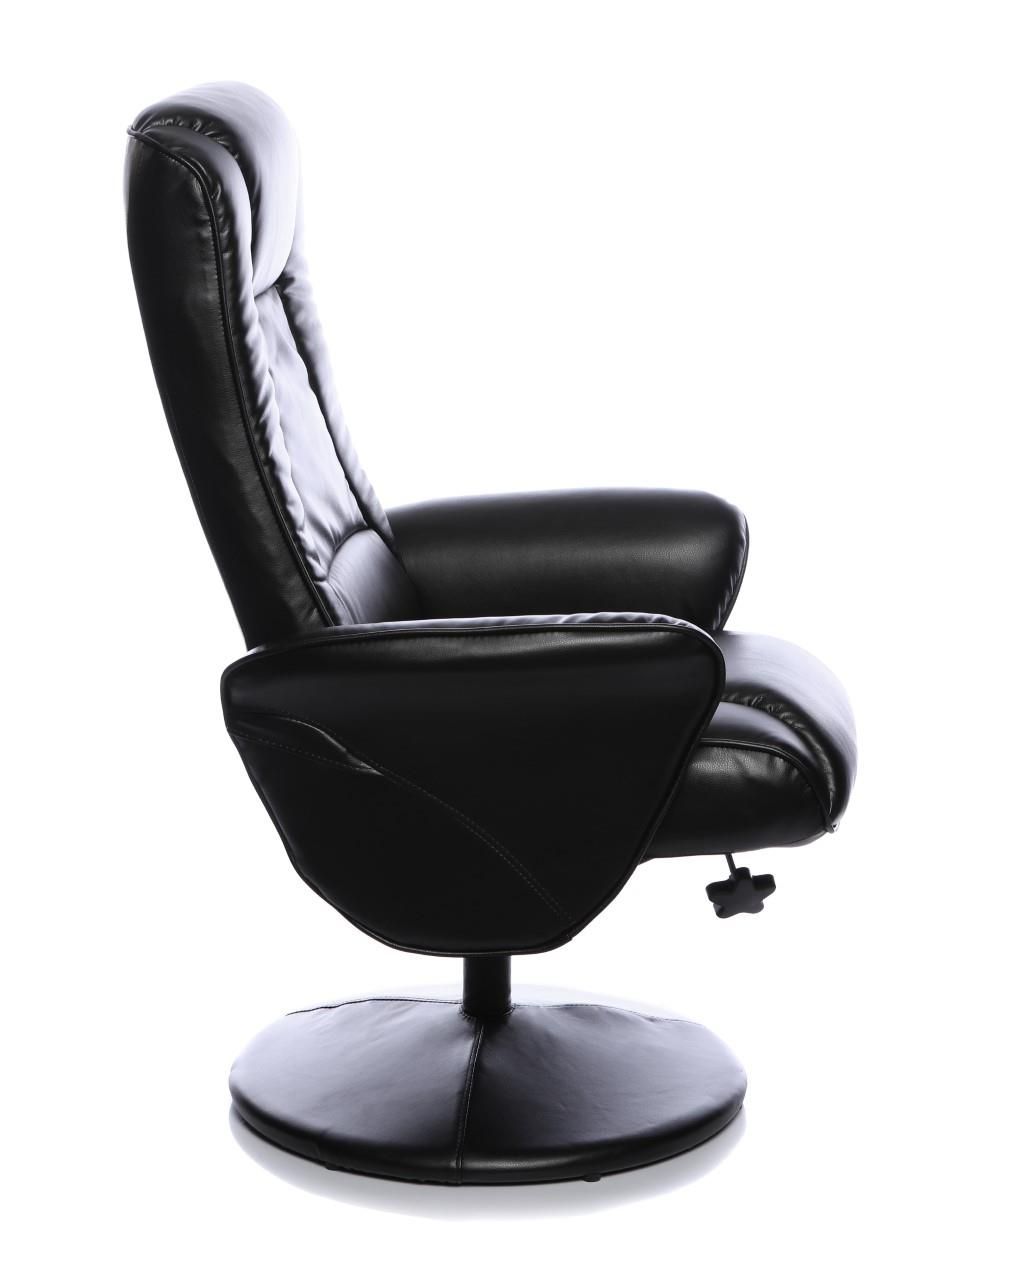 Naples Black Memory Foam Swivel Recliner Chair In Faux Leather With In Black Faux Leather Swivel Recliners (View 6 of 20)